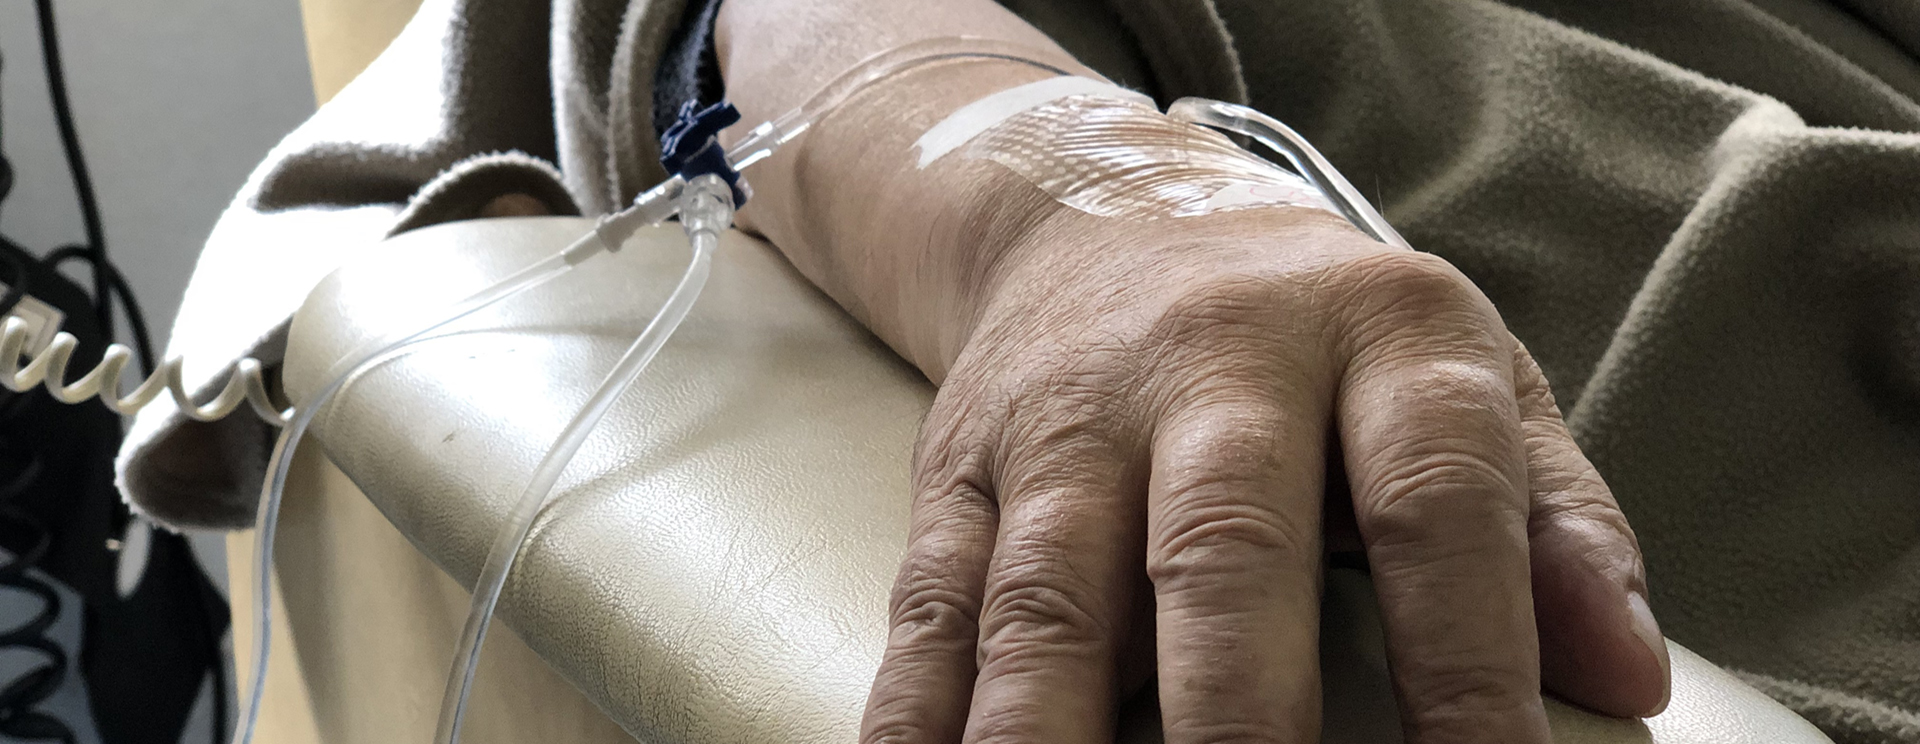 close up of woman's arm getting chemotherapy infusion